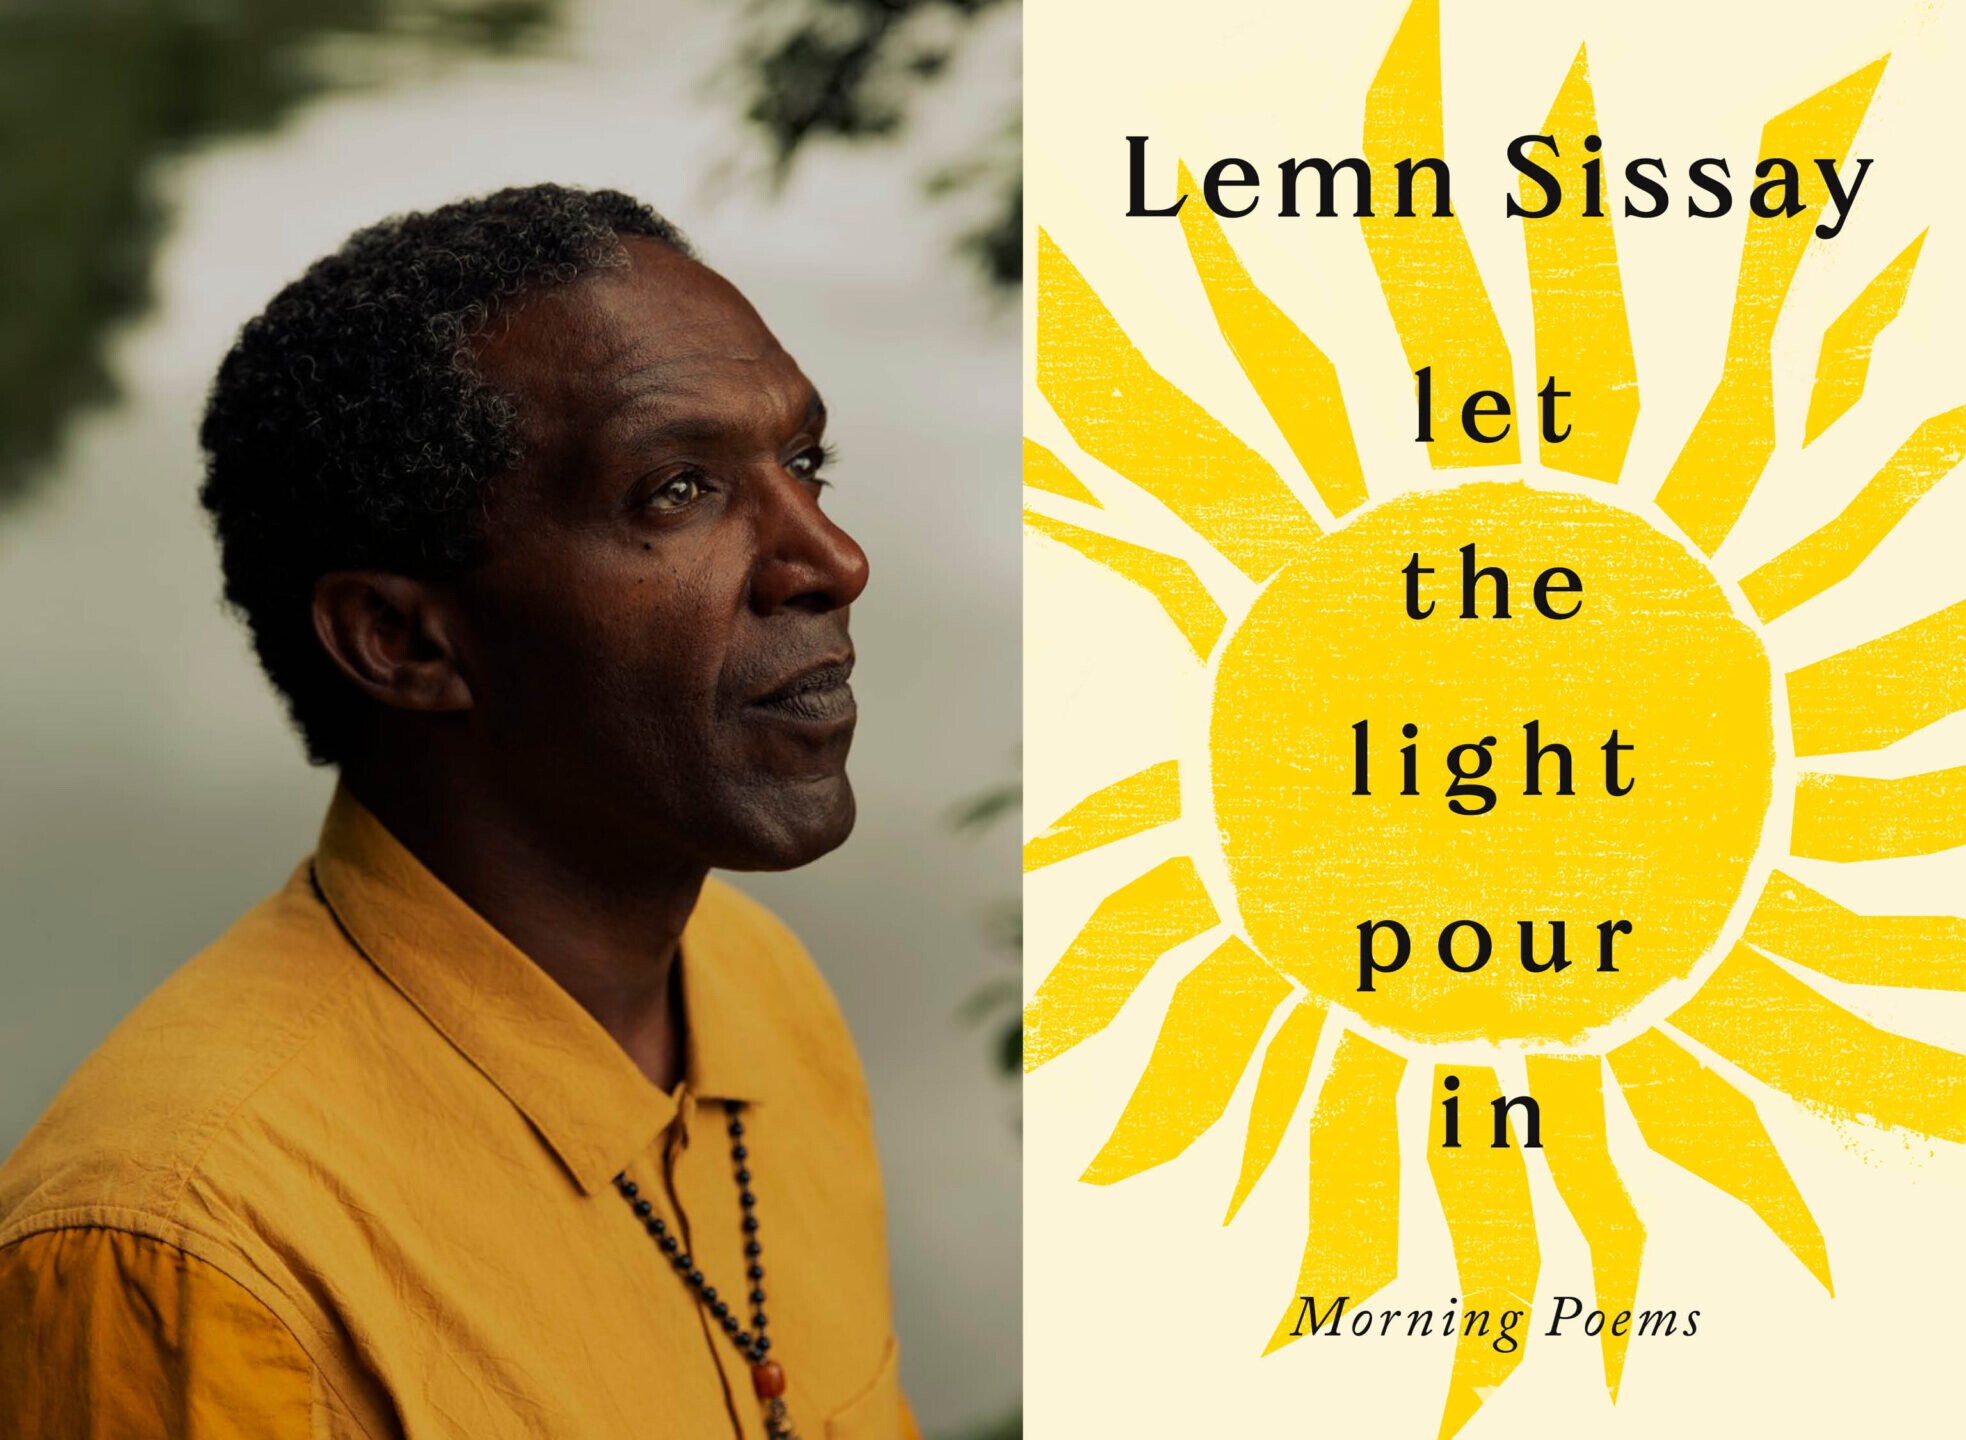 Image name Lemn Sissay Let the light pour in 1 the 11 image from the post Events in Yorkshire.com.